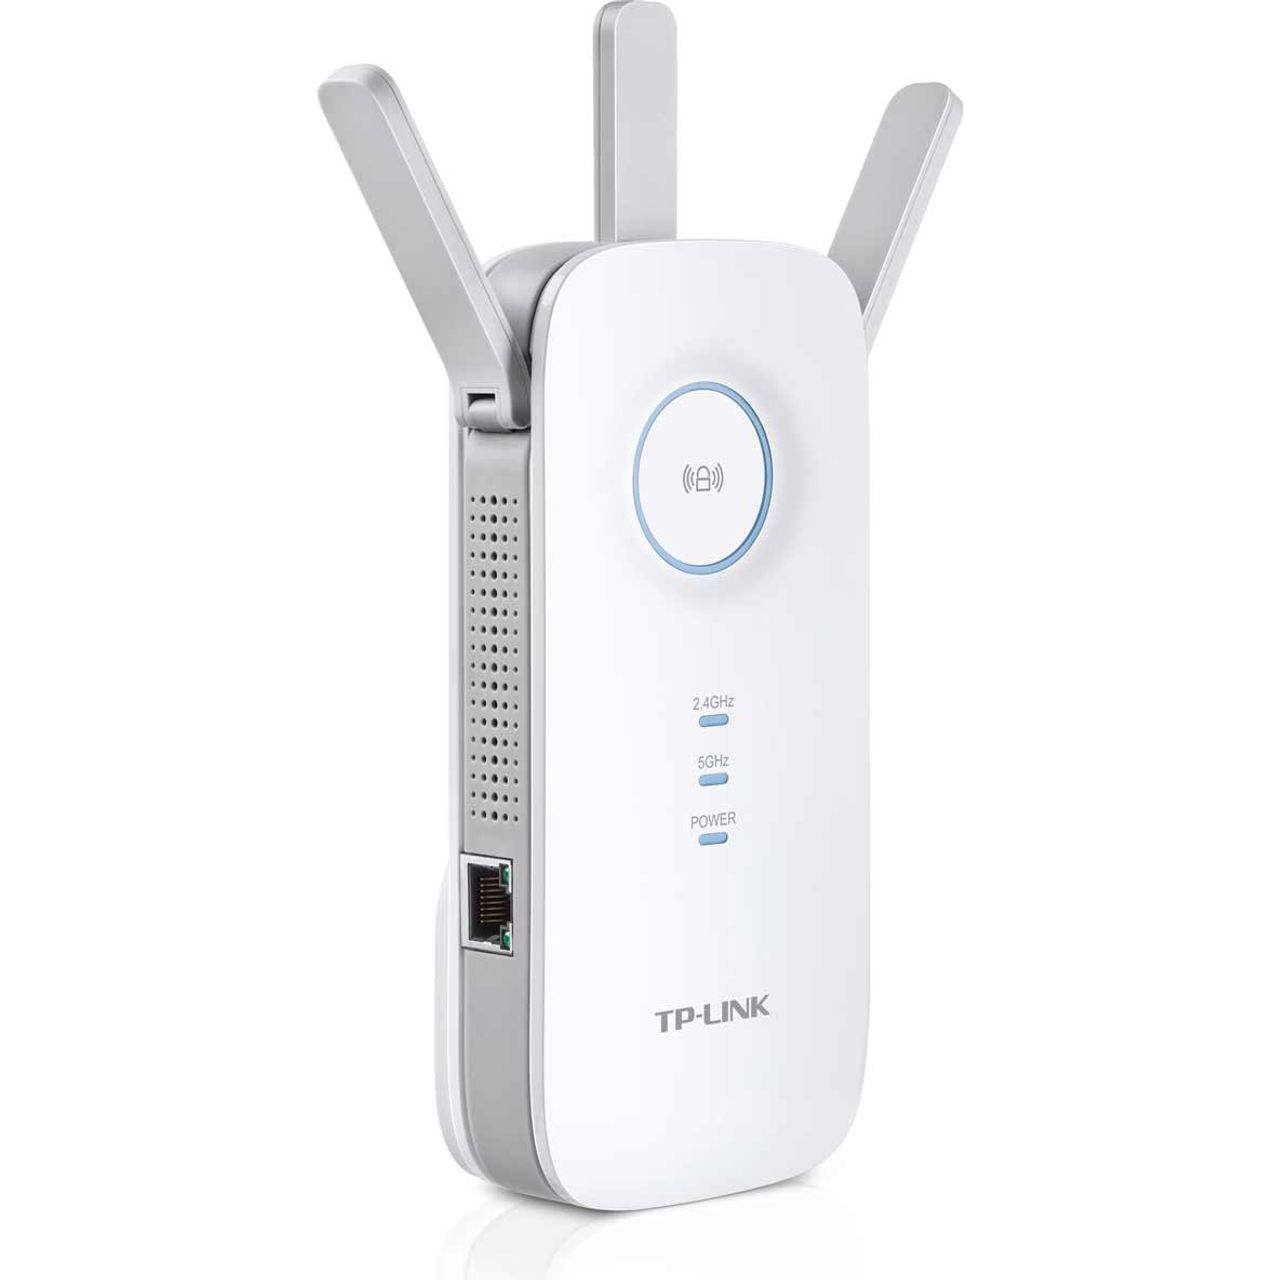 TP-Link RE450 Dual Band AC1750 WiFi Range Extender Review